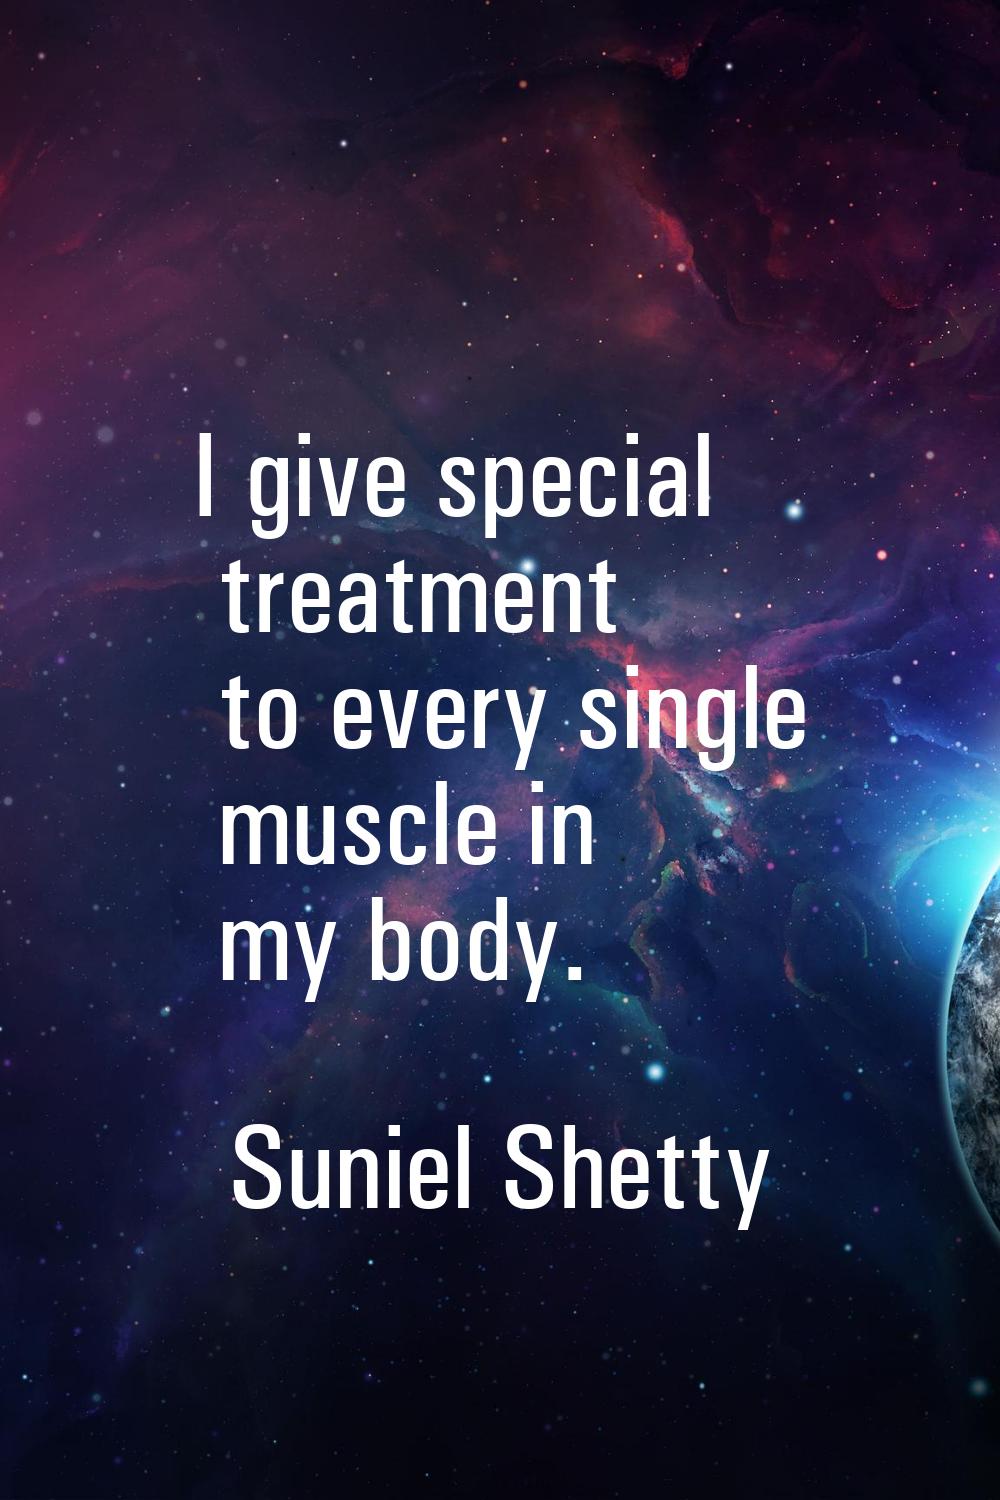 I give special treatment to every single muscle in my body.